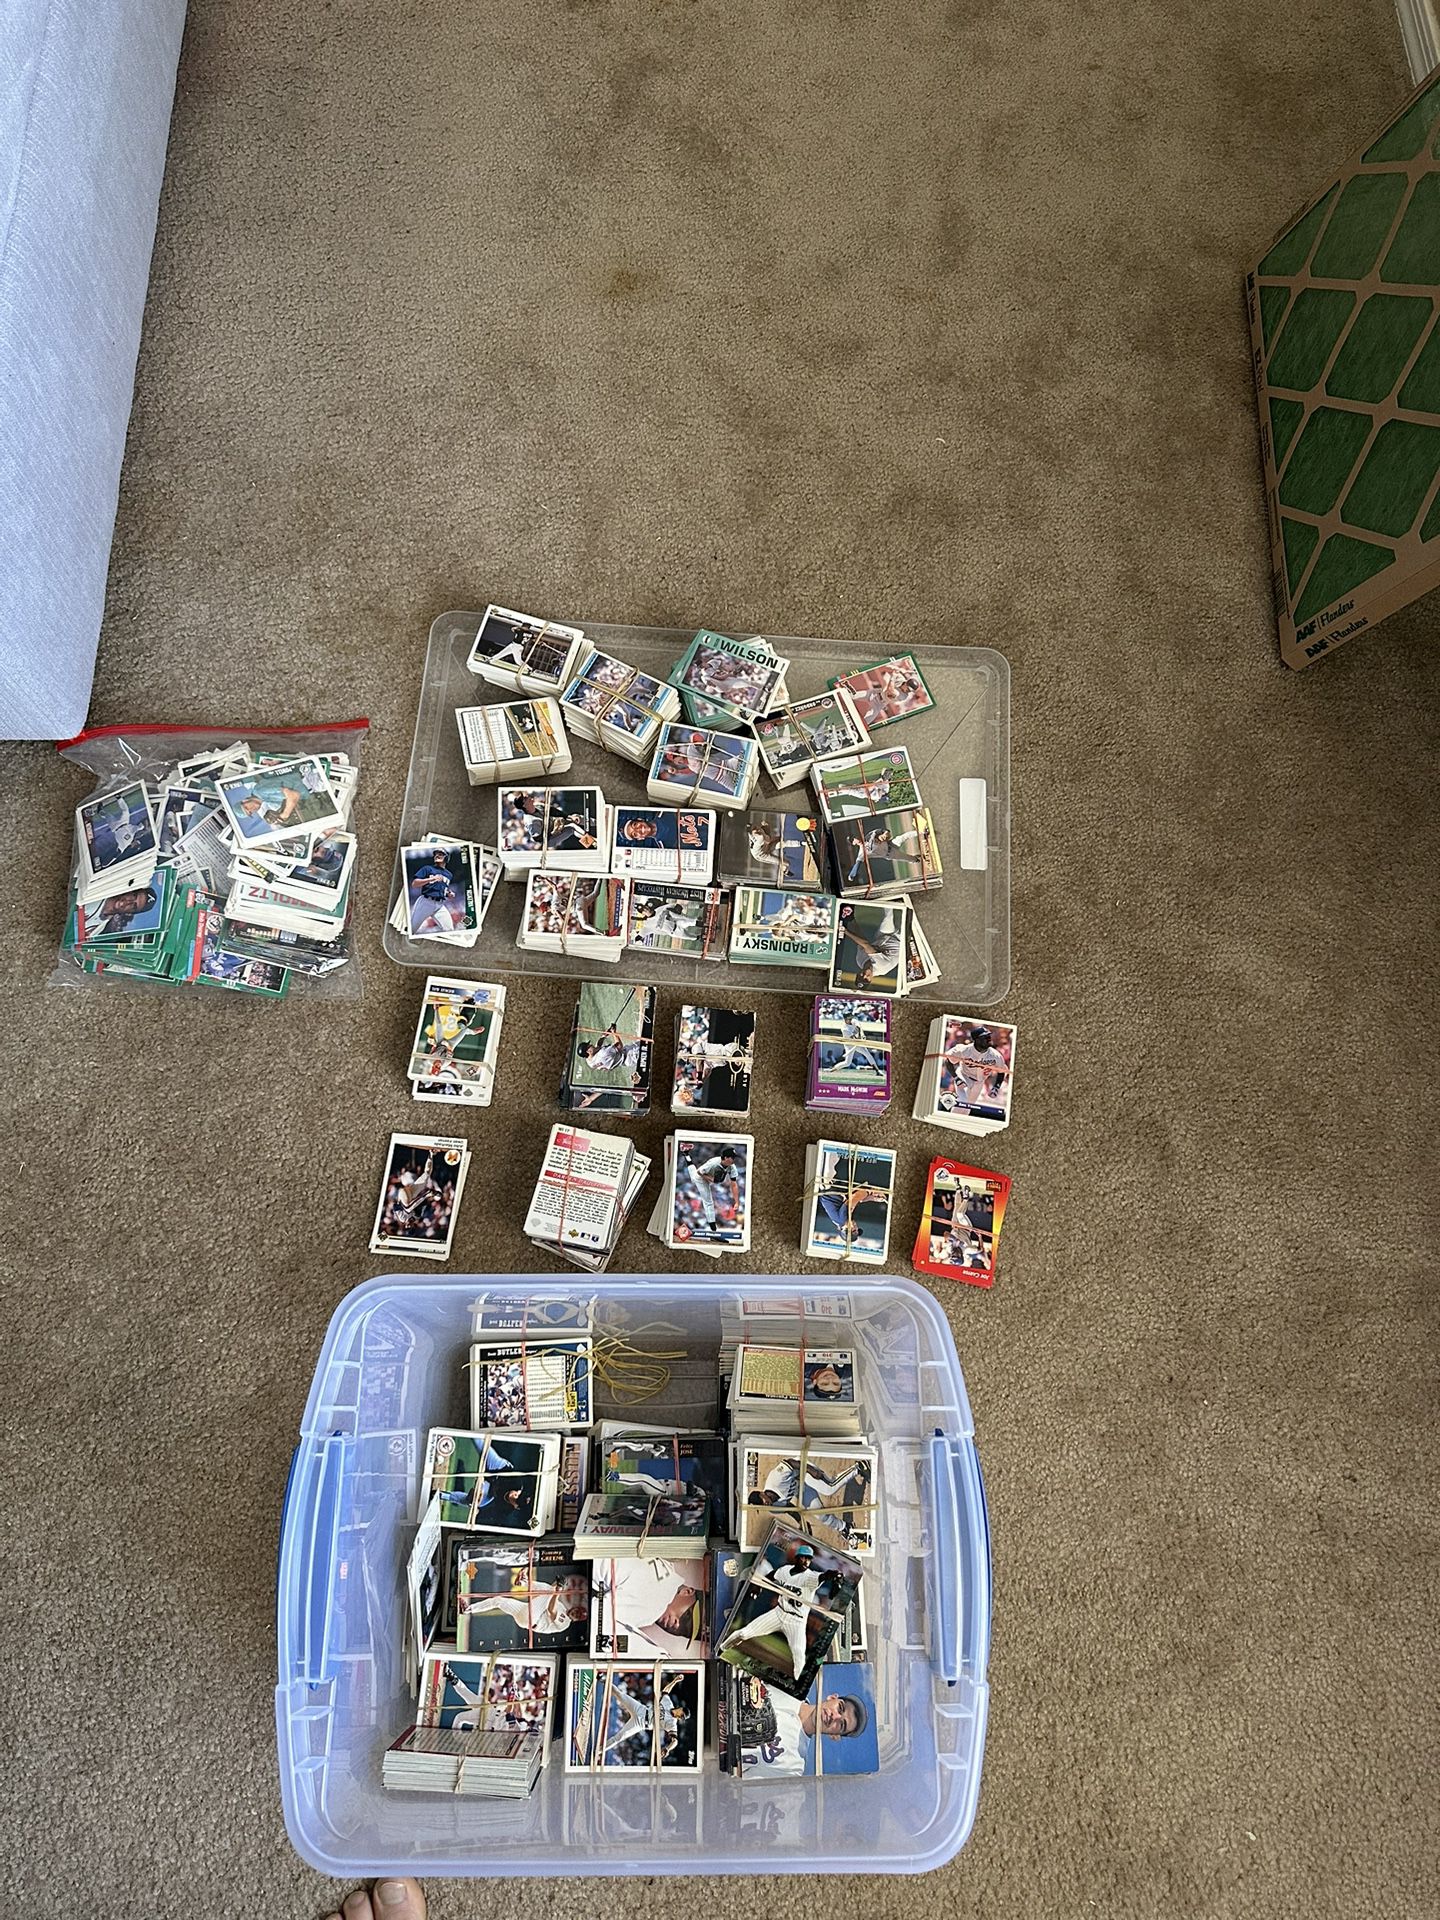 Baseball cards 90’s primarily , couple hundred of them